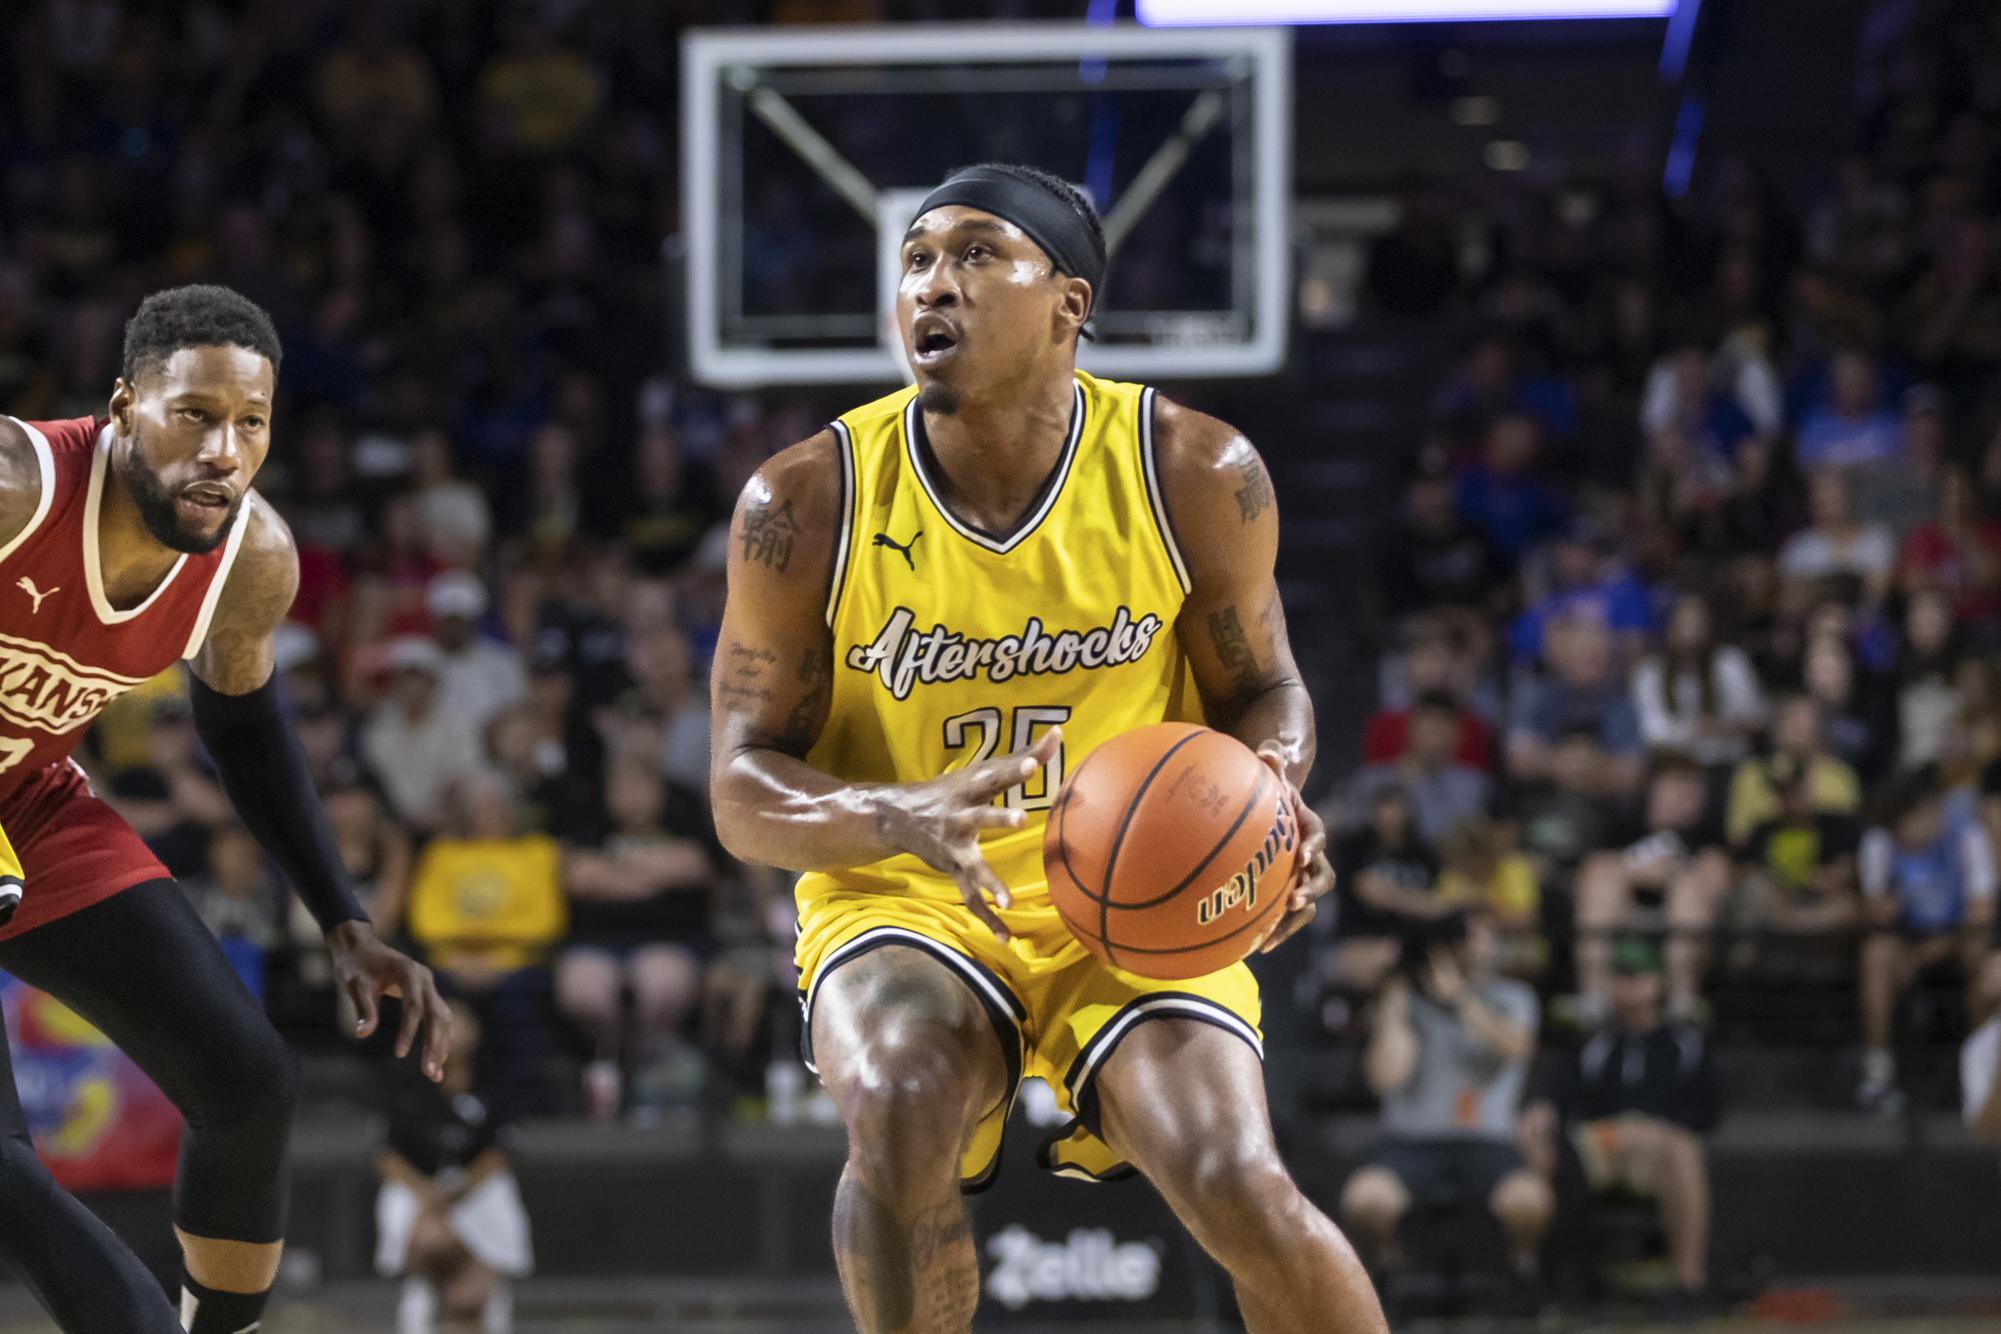 AfterShocks point guard Tyrus McGee looks to shoot during the game against Team Arkansas on July 23. The AfterShocks won, 63-59.